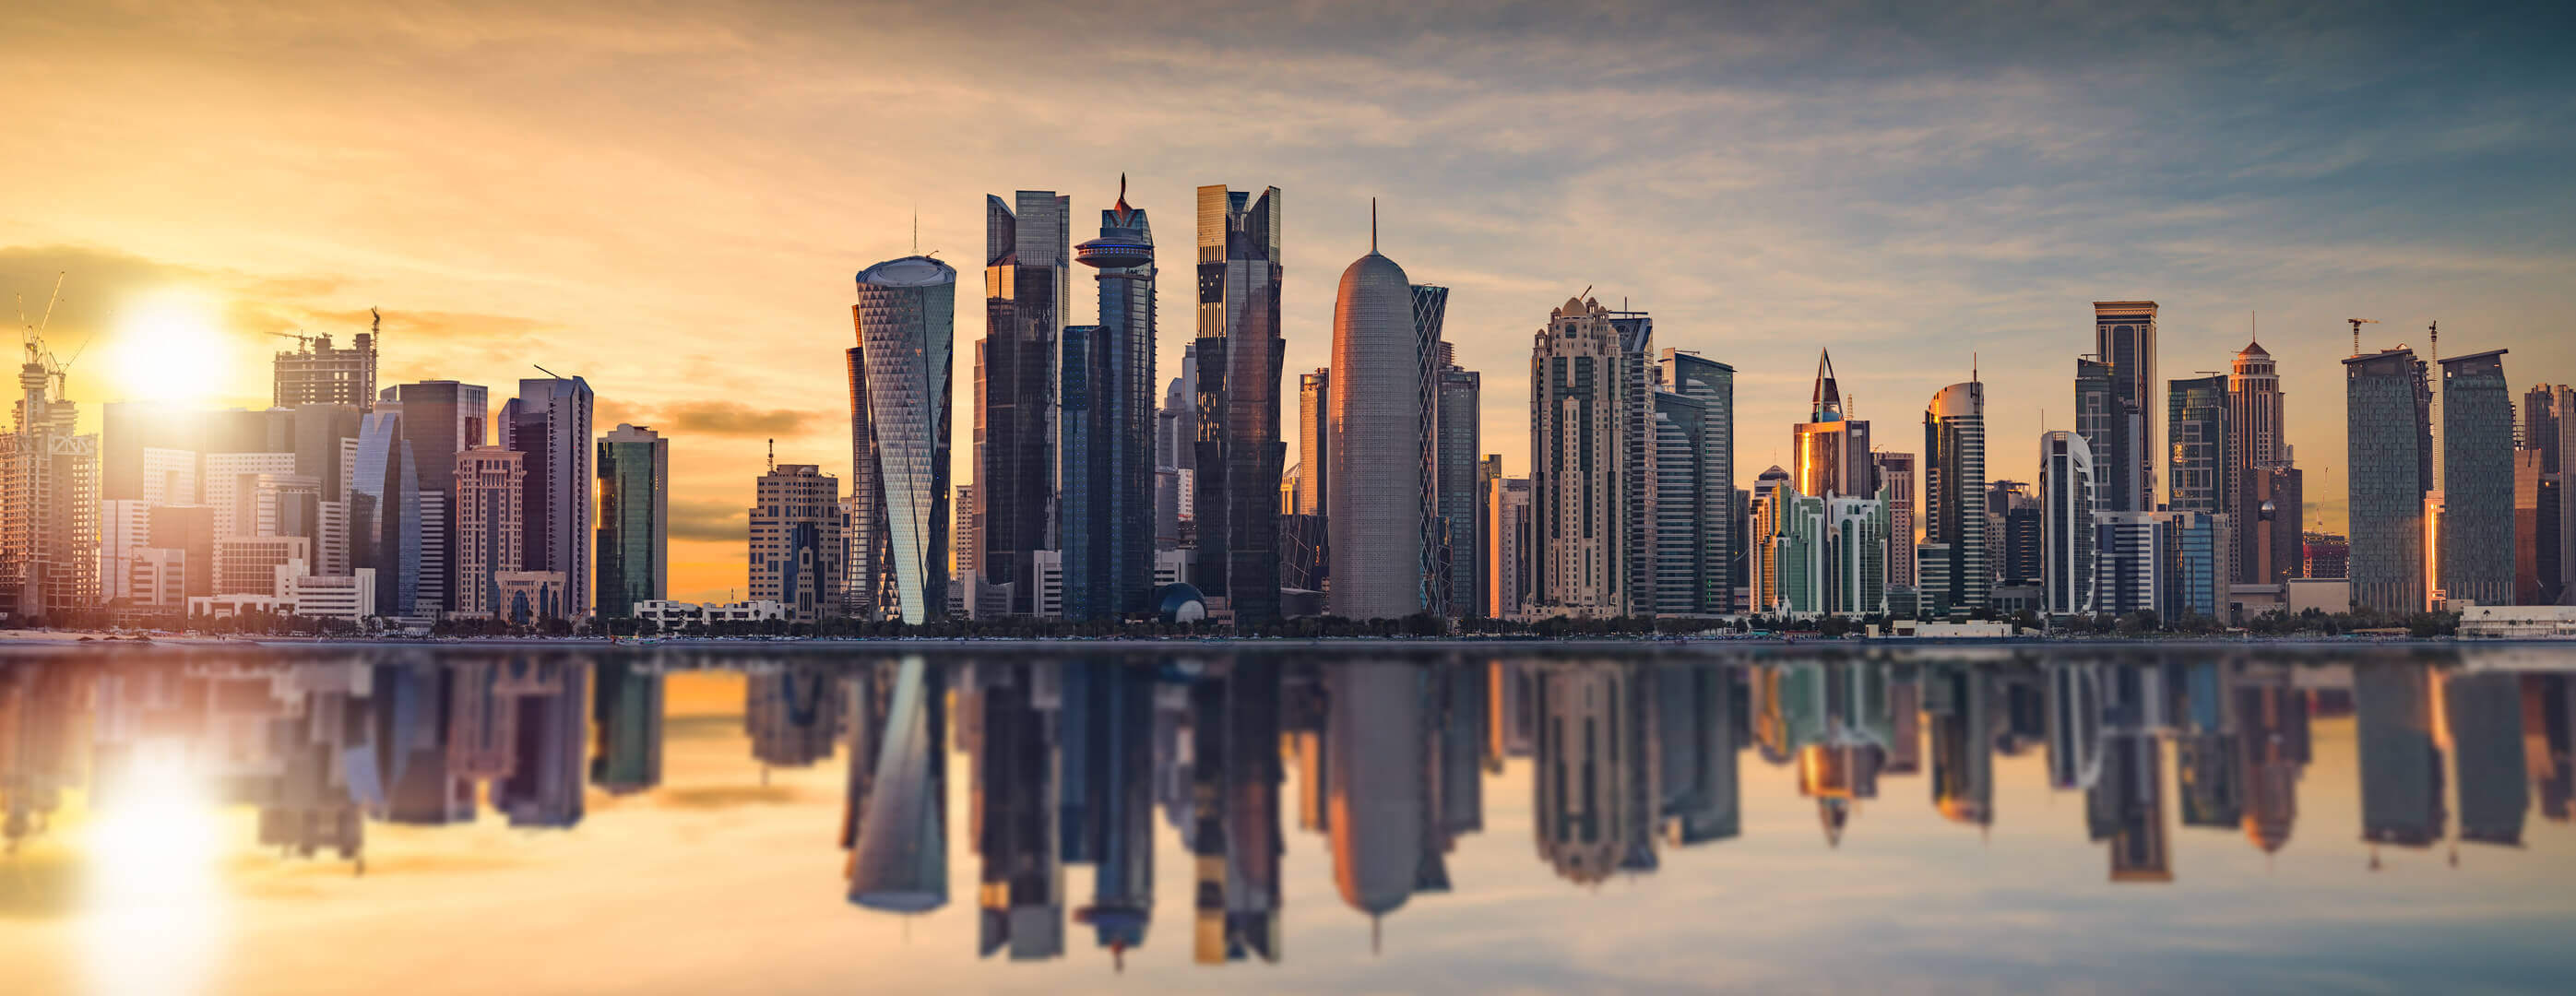 The skyline of Doha in Qatar during sunset